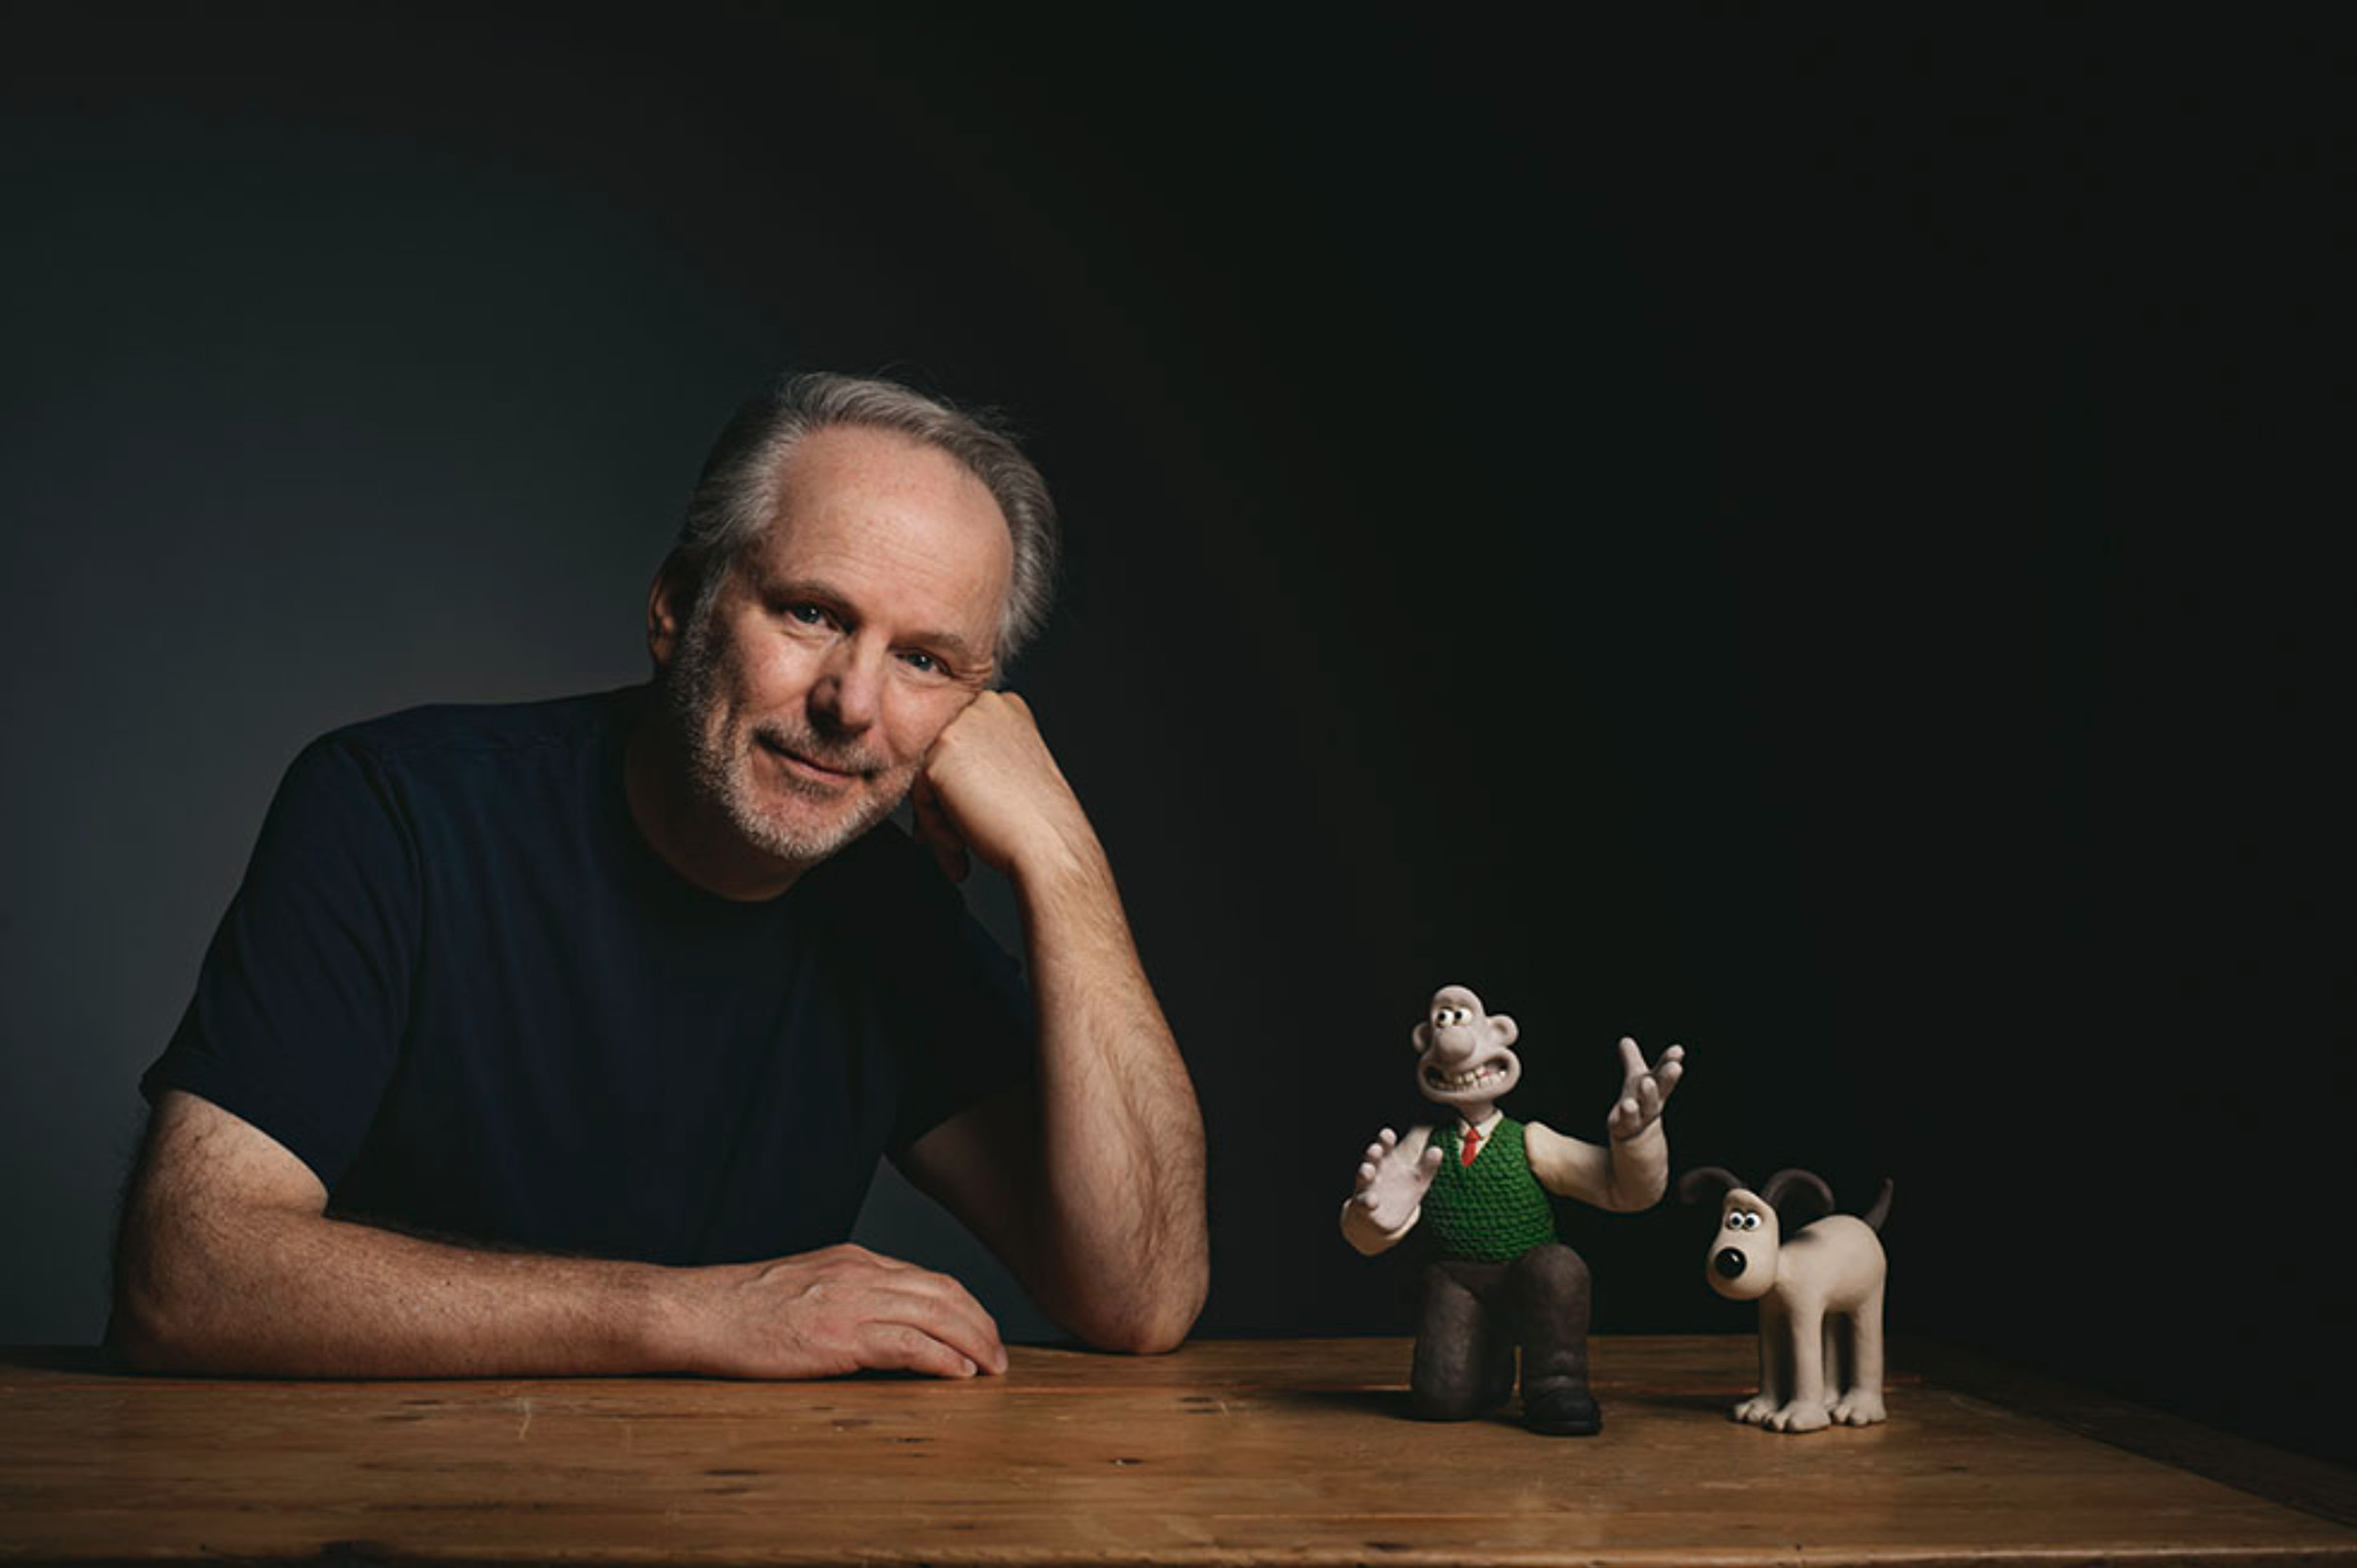 Nick park, creator and director of Wallace & Gromit.